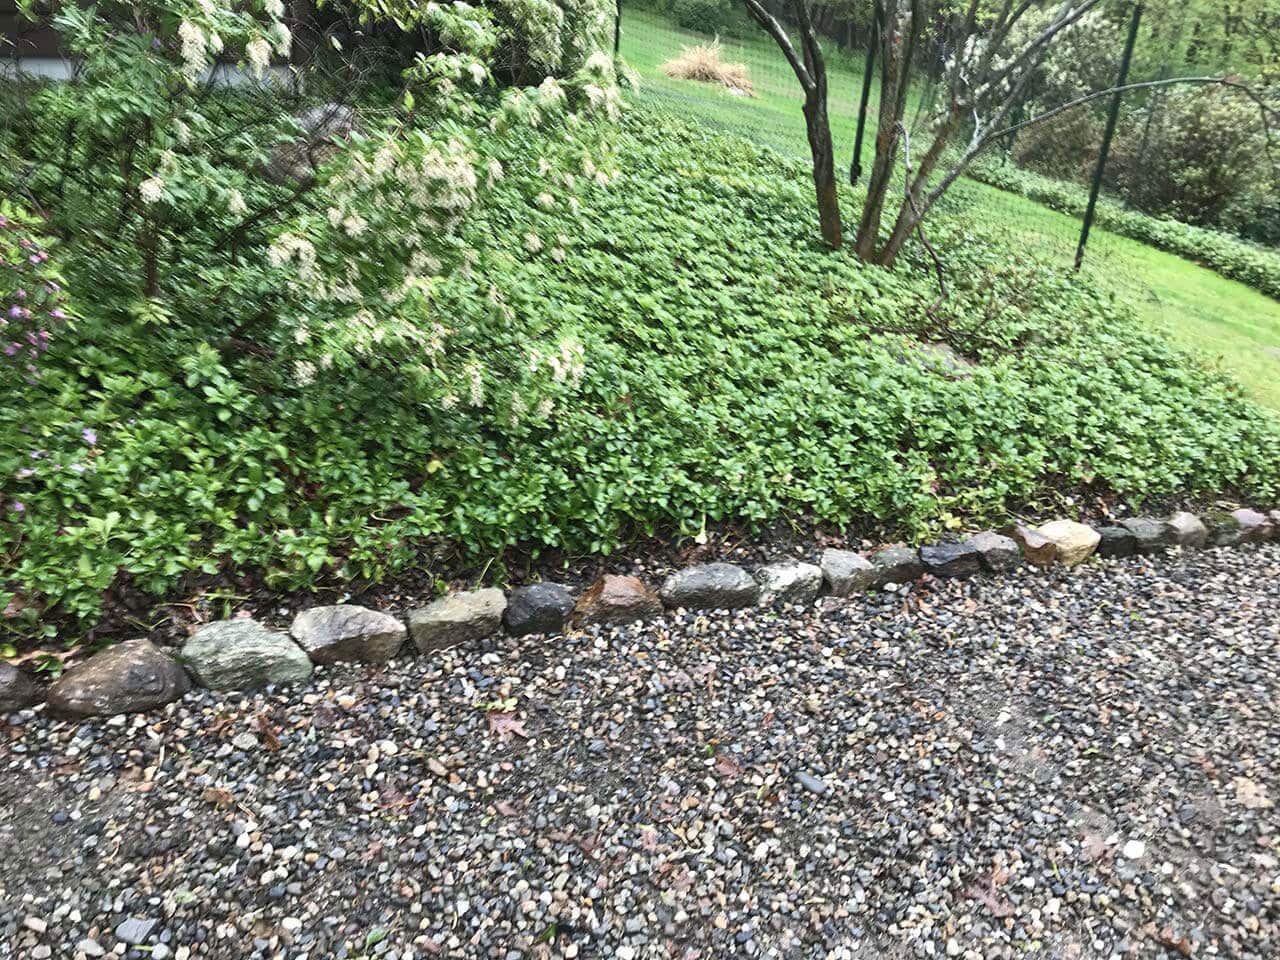 Green plants with laying field stones as a border.